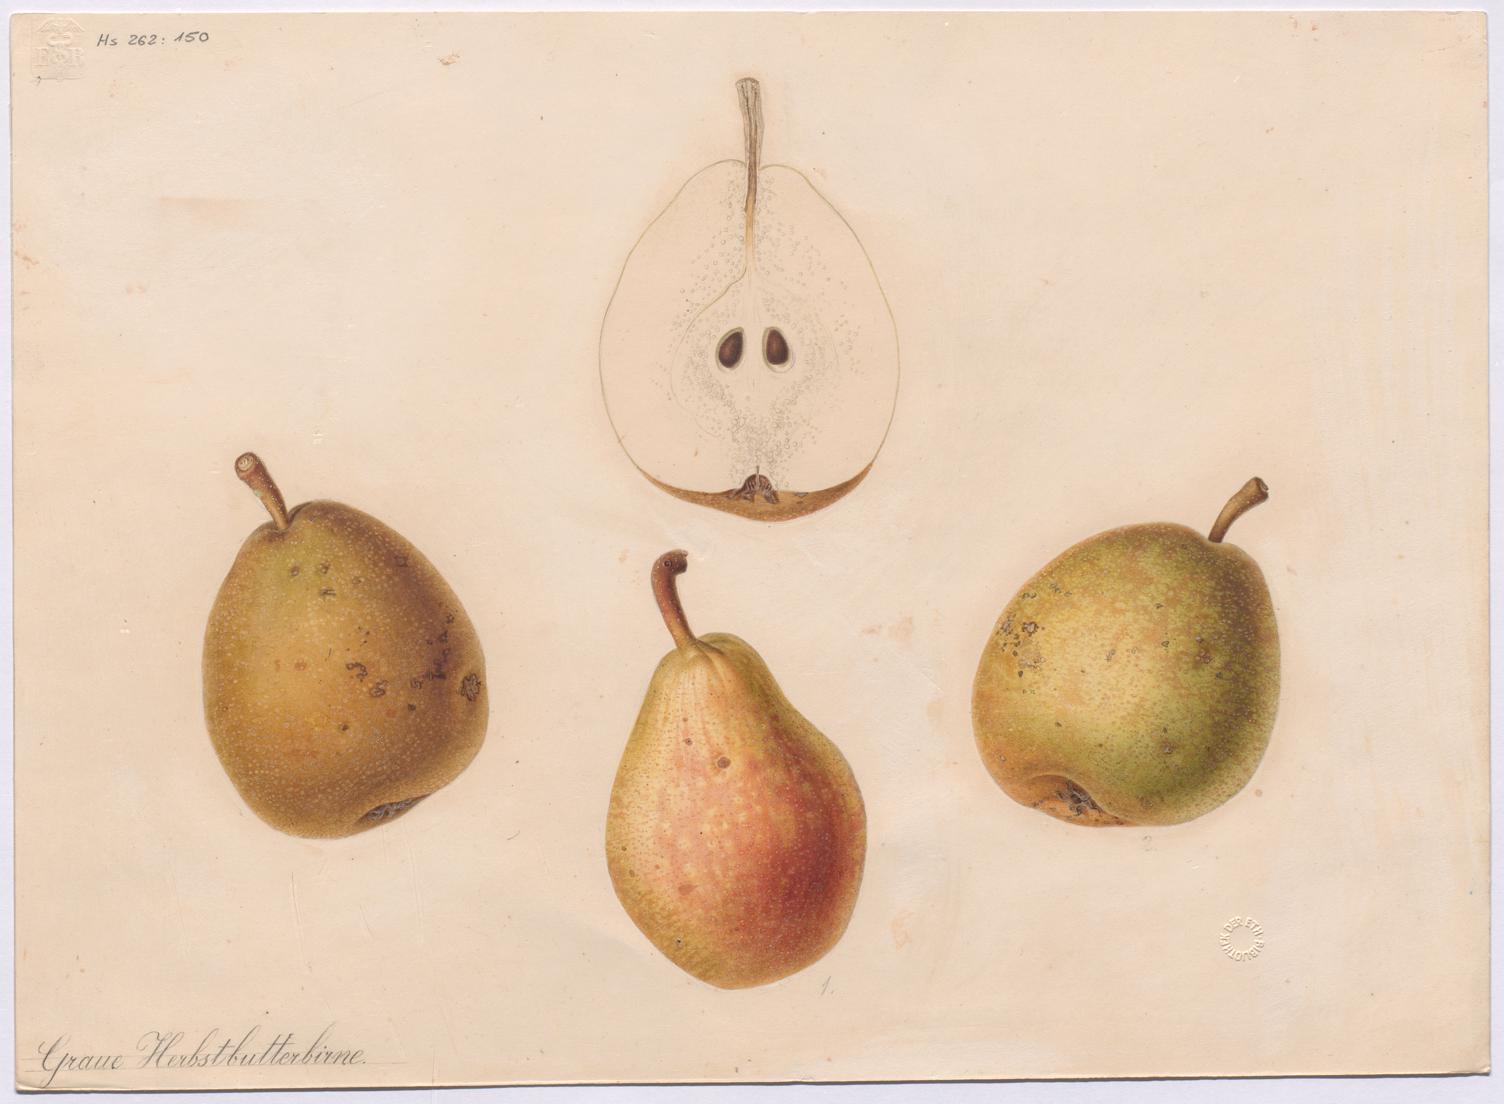 the three fruits are labeled with different things